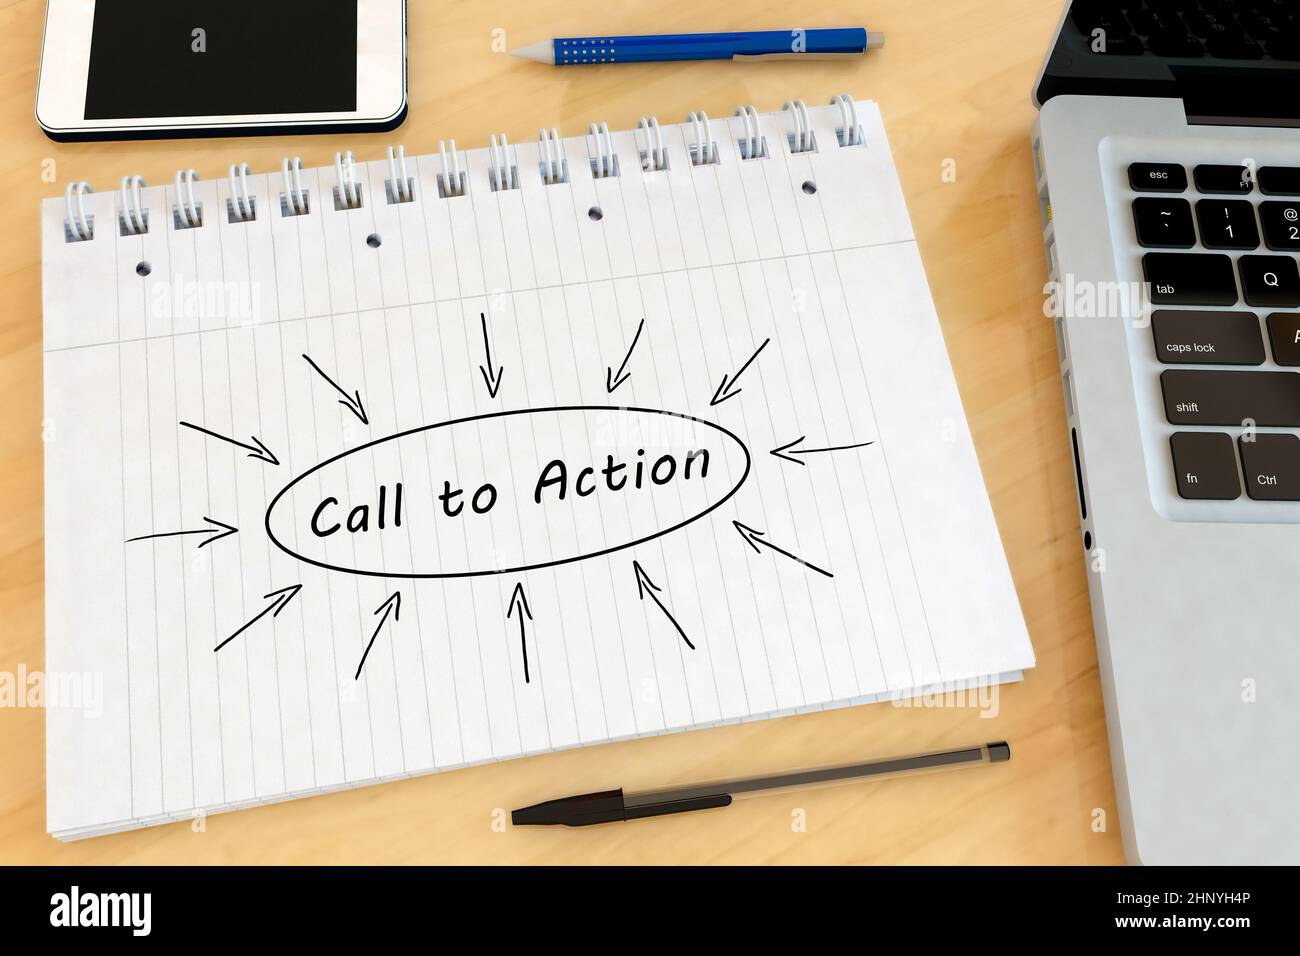 Call to Action - handwritten text in a notebook on a desk - 3d render illustration. Stock Photo